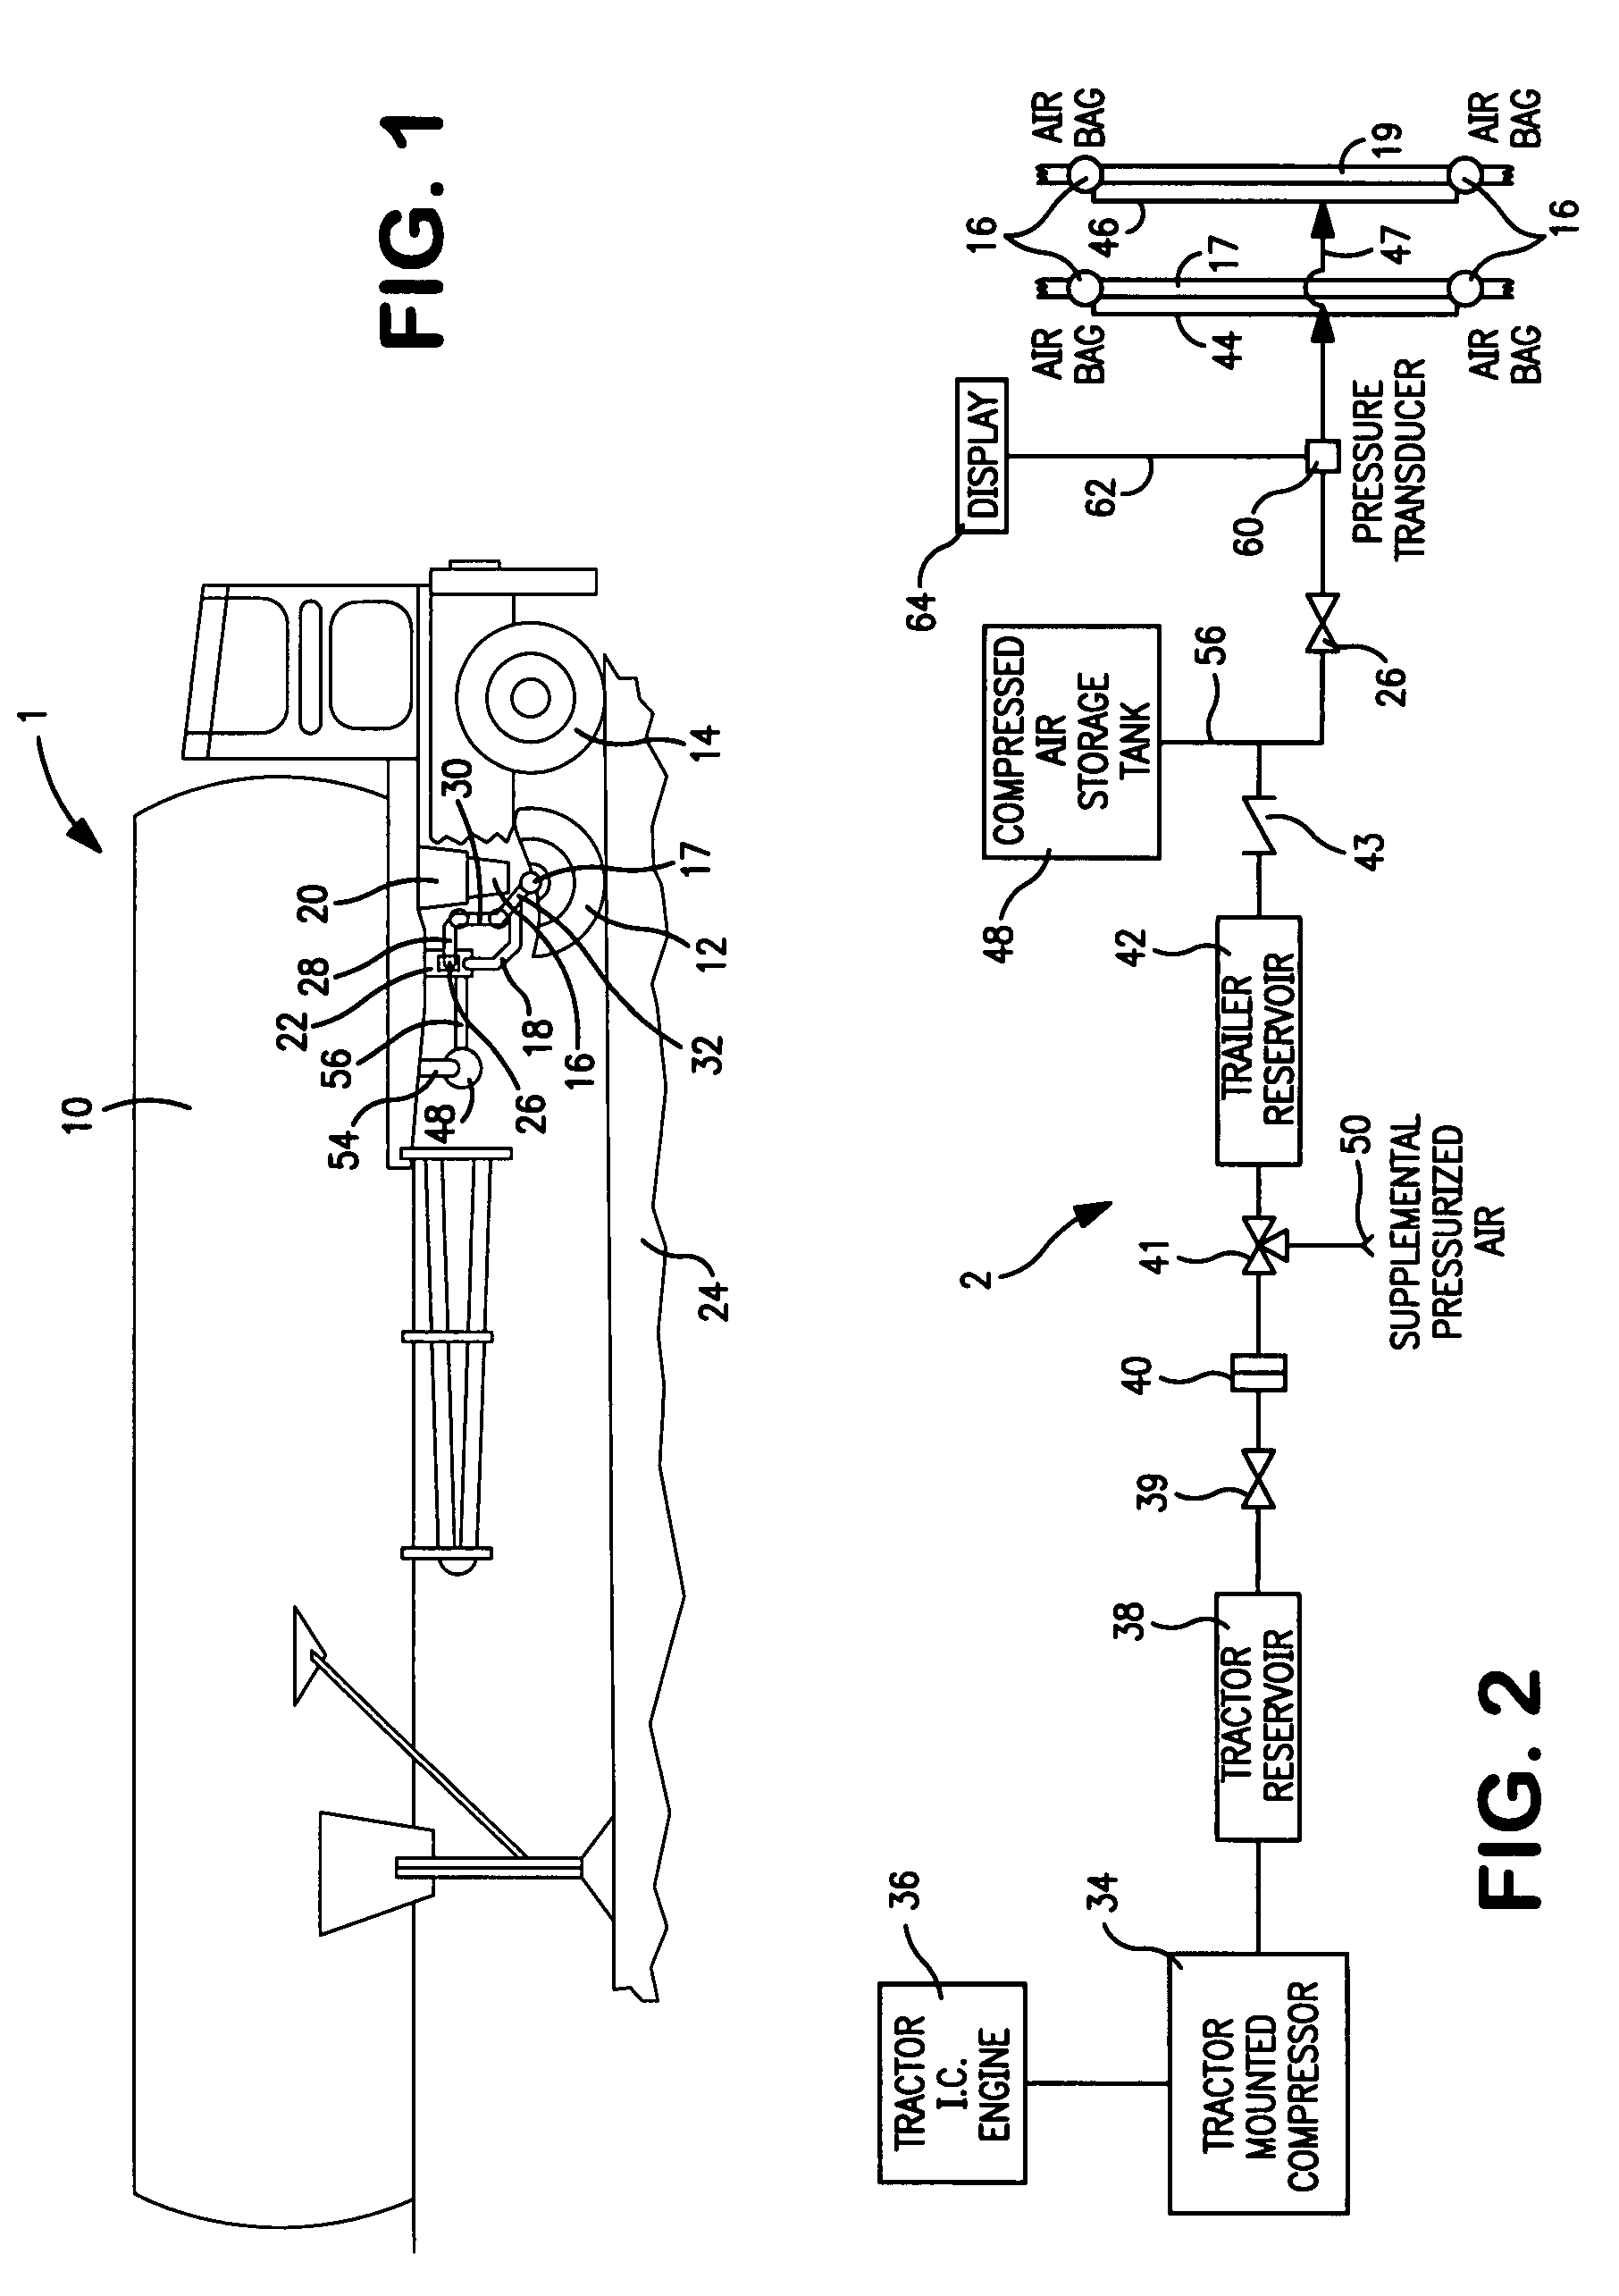 Method of measuring the weight of bulk liquid material within a trailer